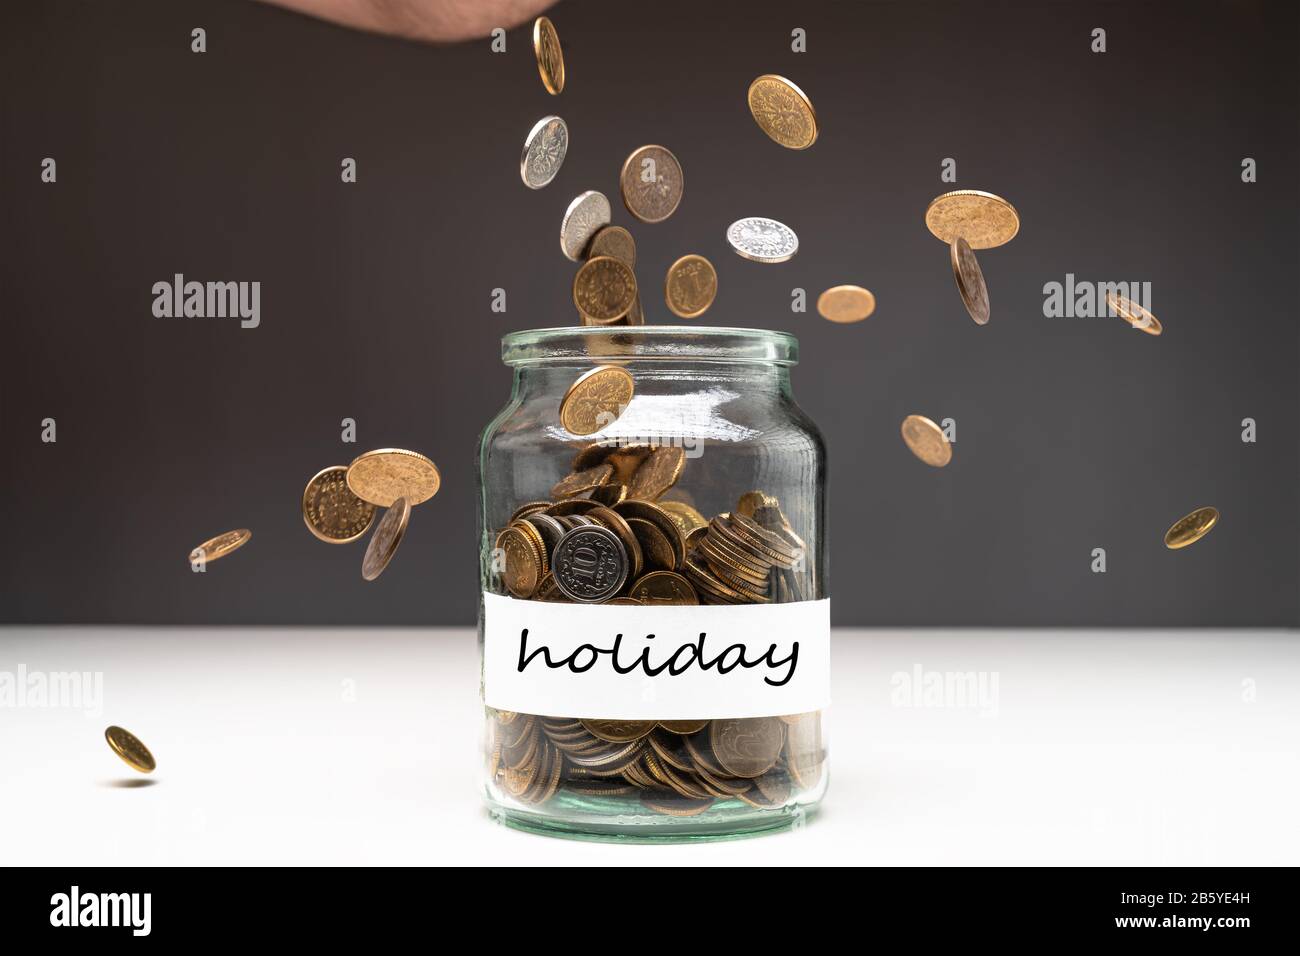 Coins in a jar with holiday text on a white label. Money falling from the sky above. Savings abstract concept. Copy space. Stock Photo